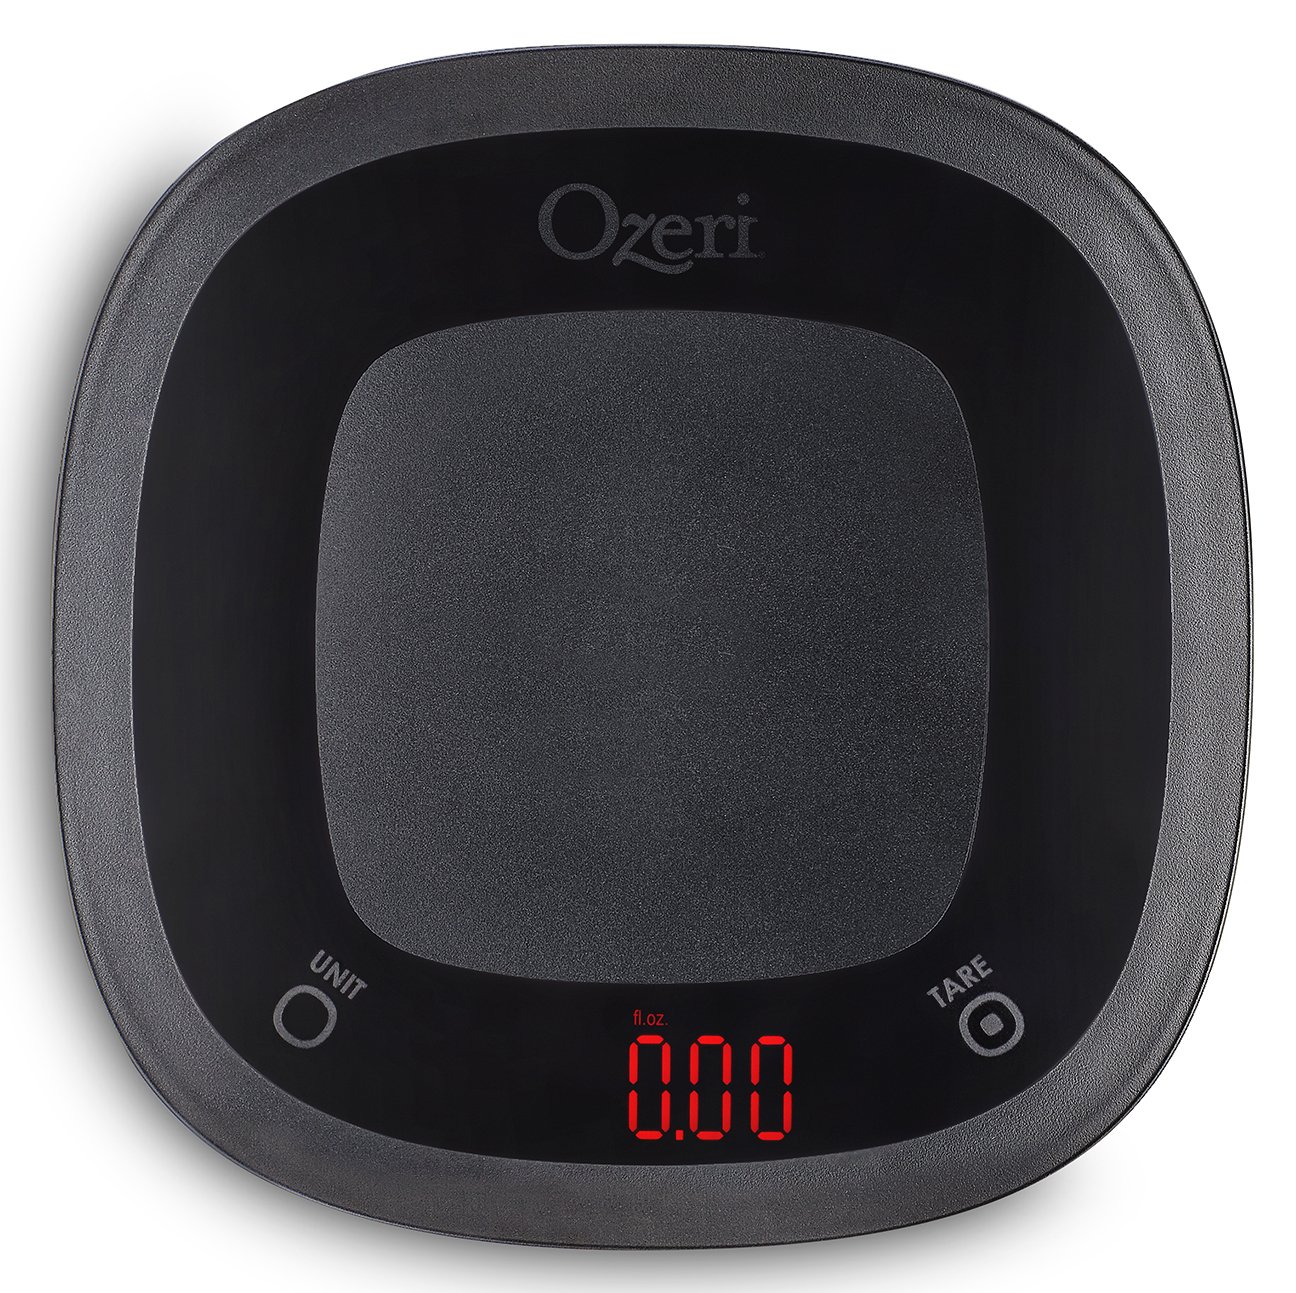 Ozeri Touch Waterproof Digital Kitchen Scale Washable and Submersible, Small, Black